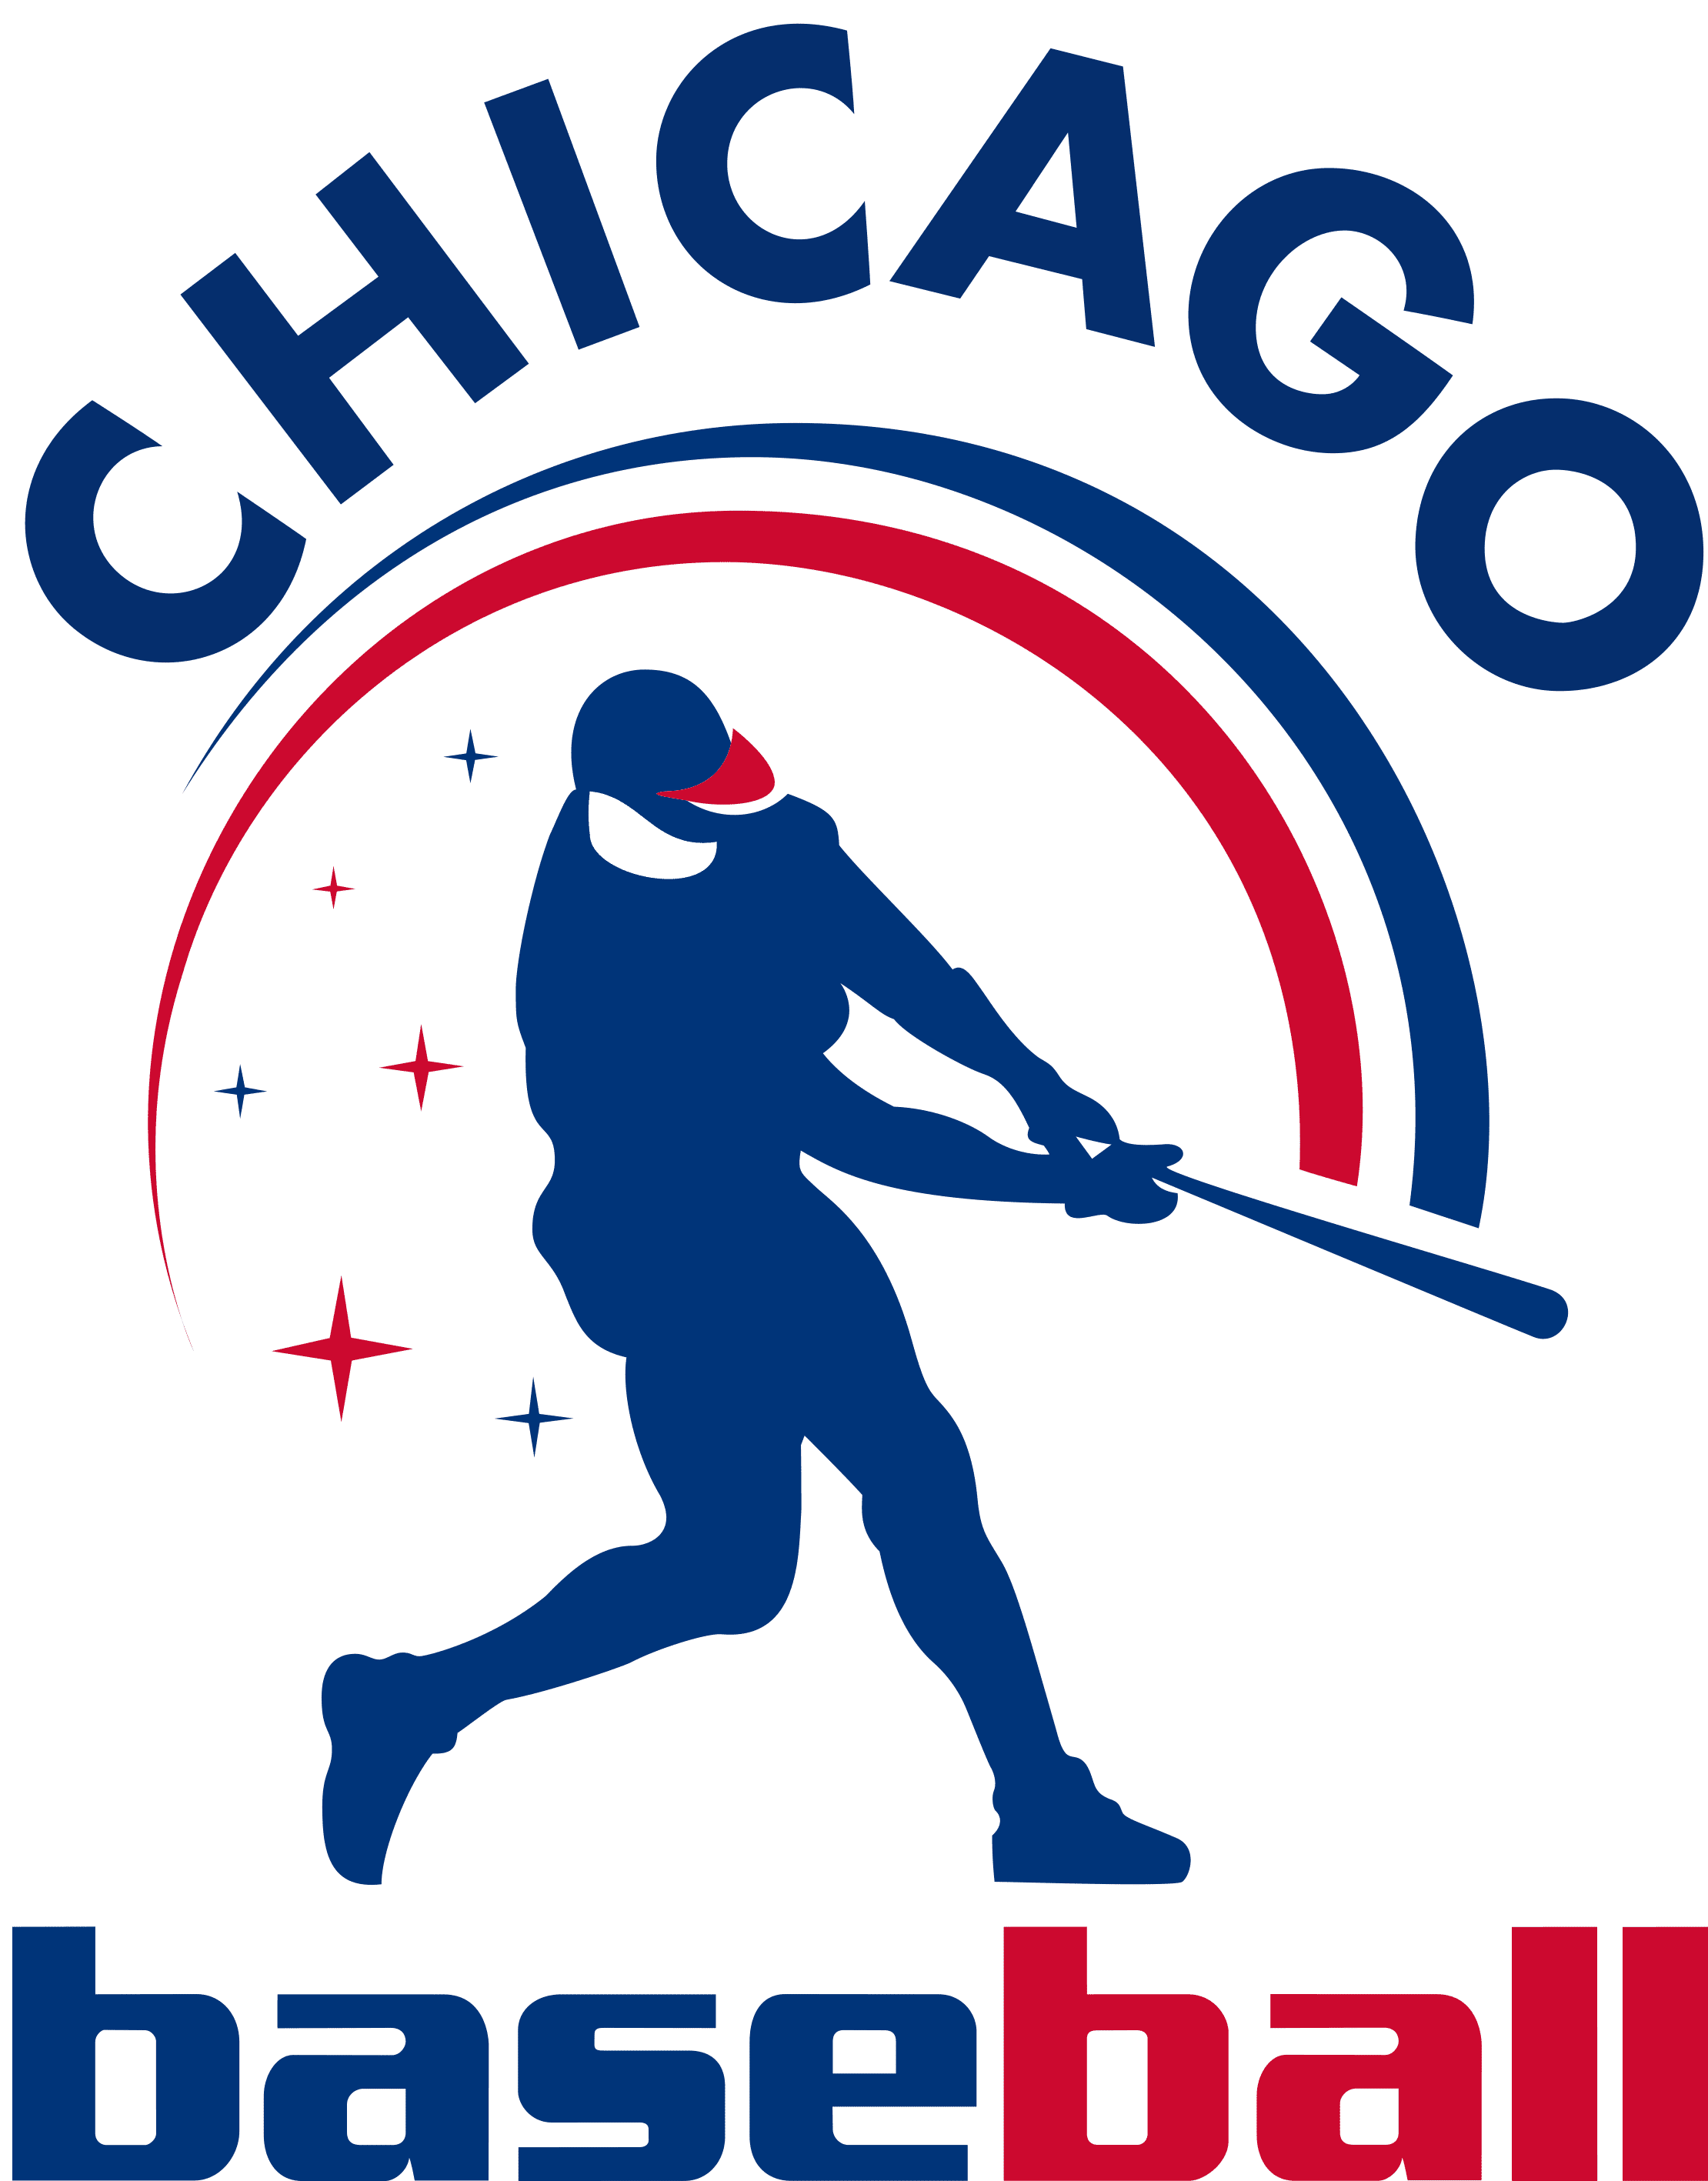 Major League Baseball (MLB) vector in the SVG file format for cut